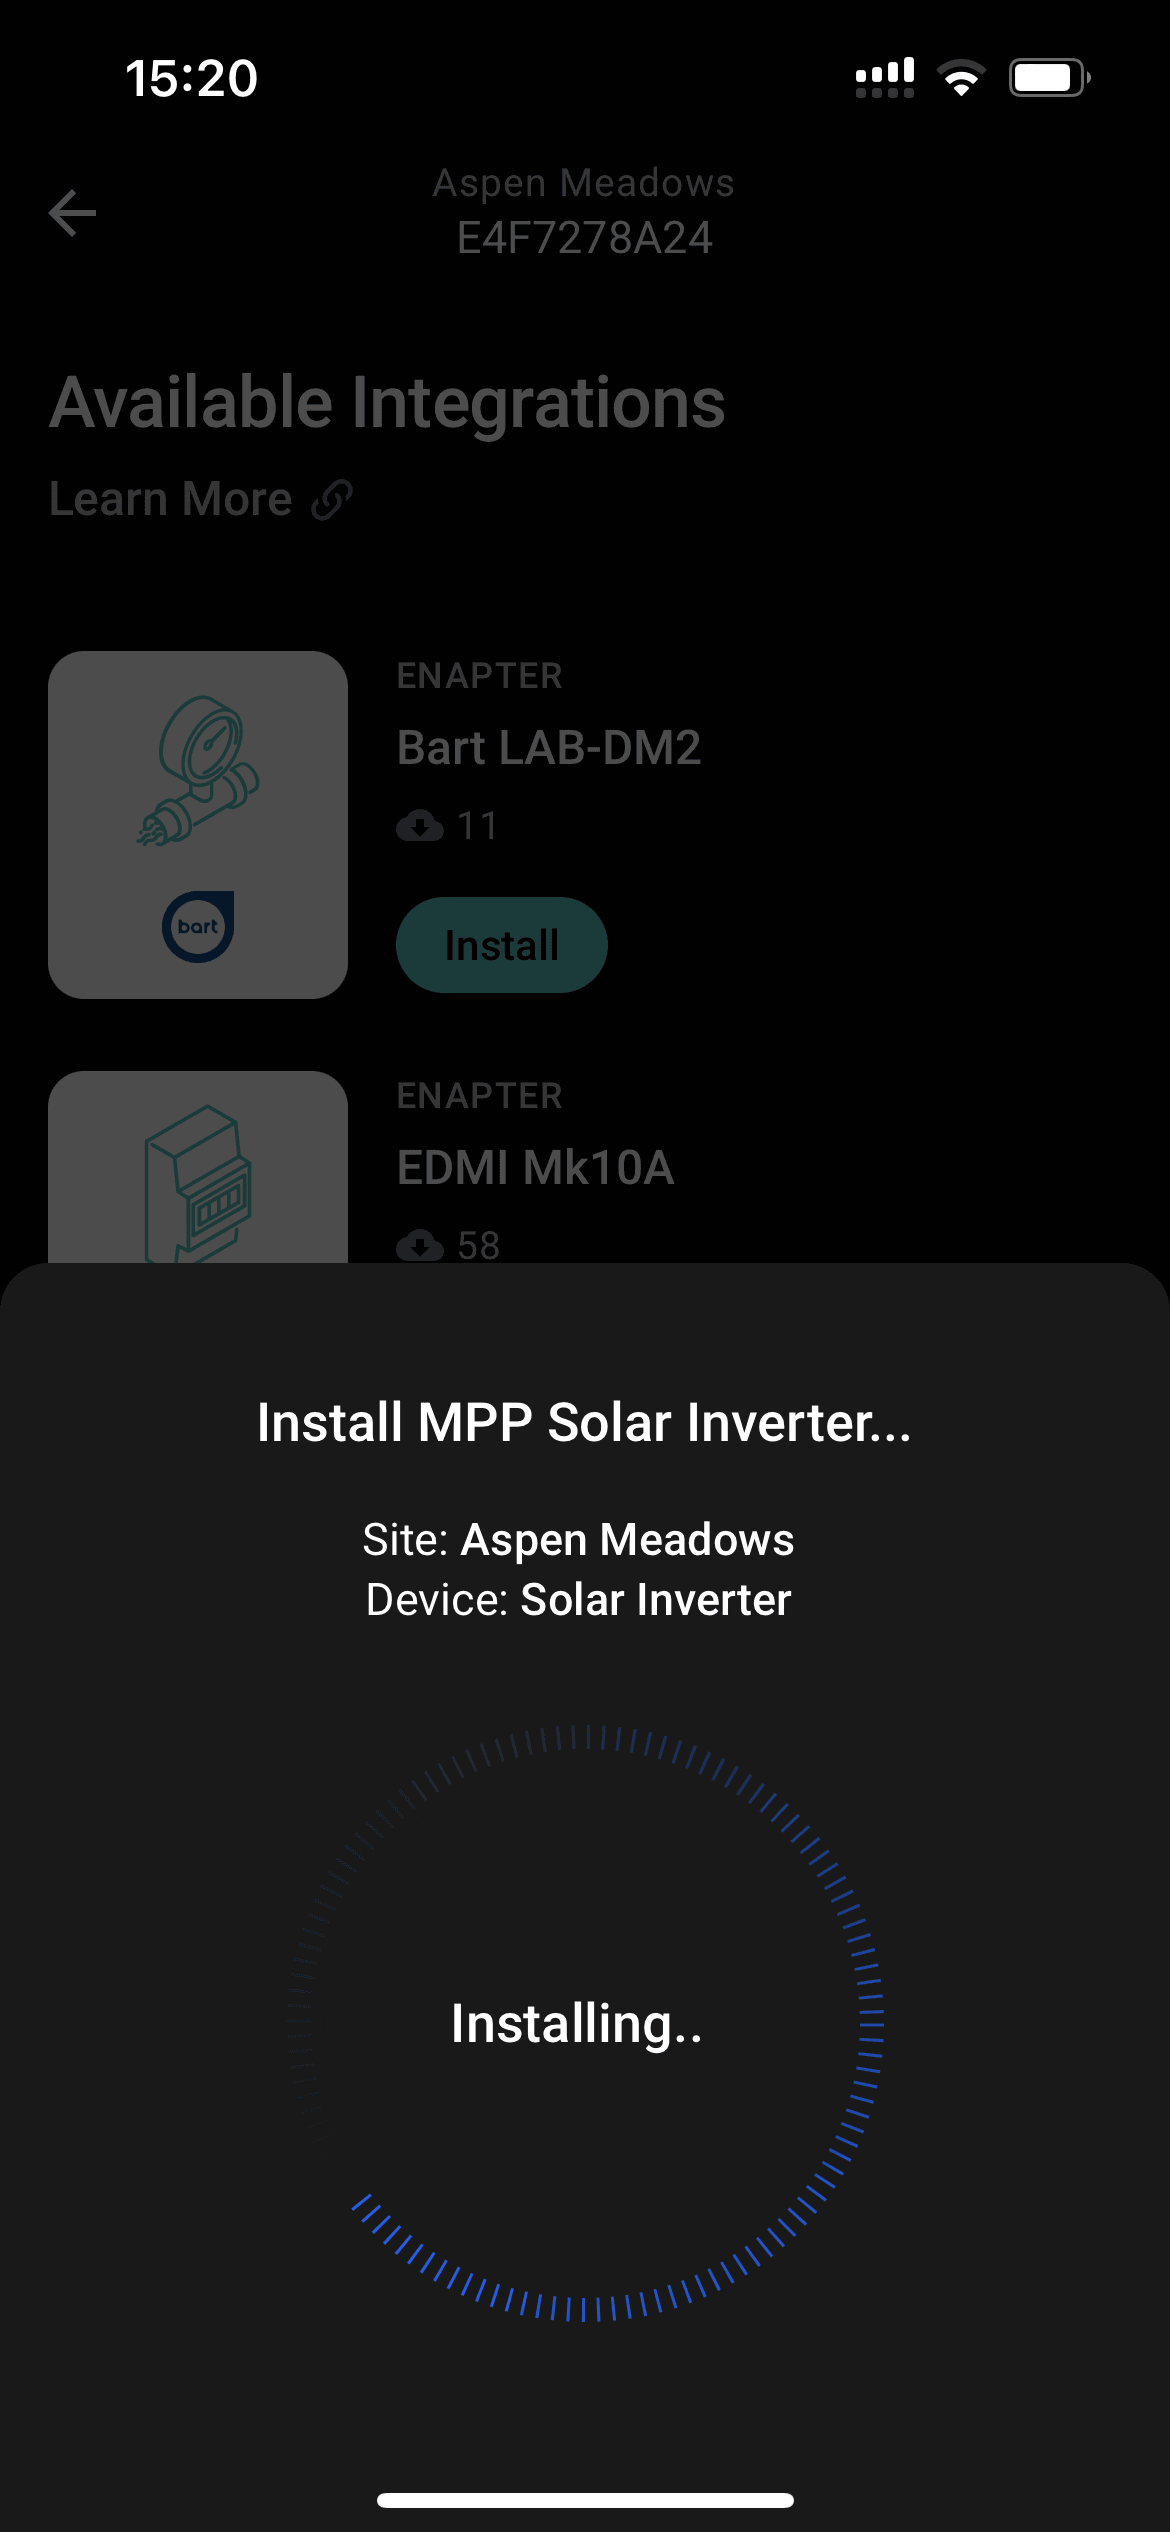 Wait until installation process is finished, normally it takes few seconds